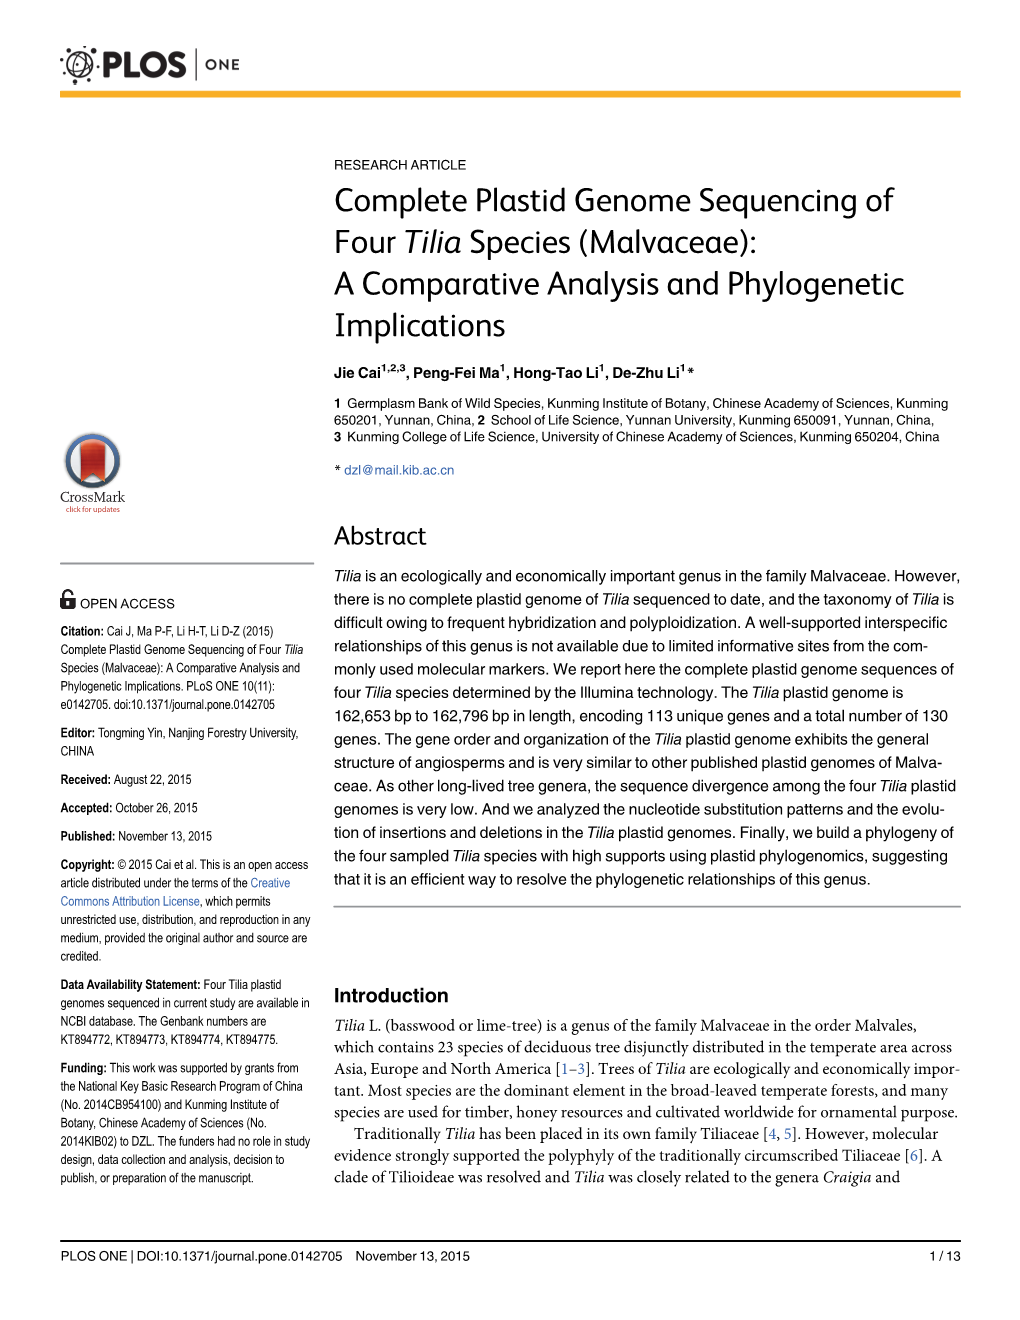 Complete Plastid Genome Sequencing of Four Tilia Species (Malvaceae): a Comparative Analysis and Phylogenetic Implications